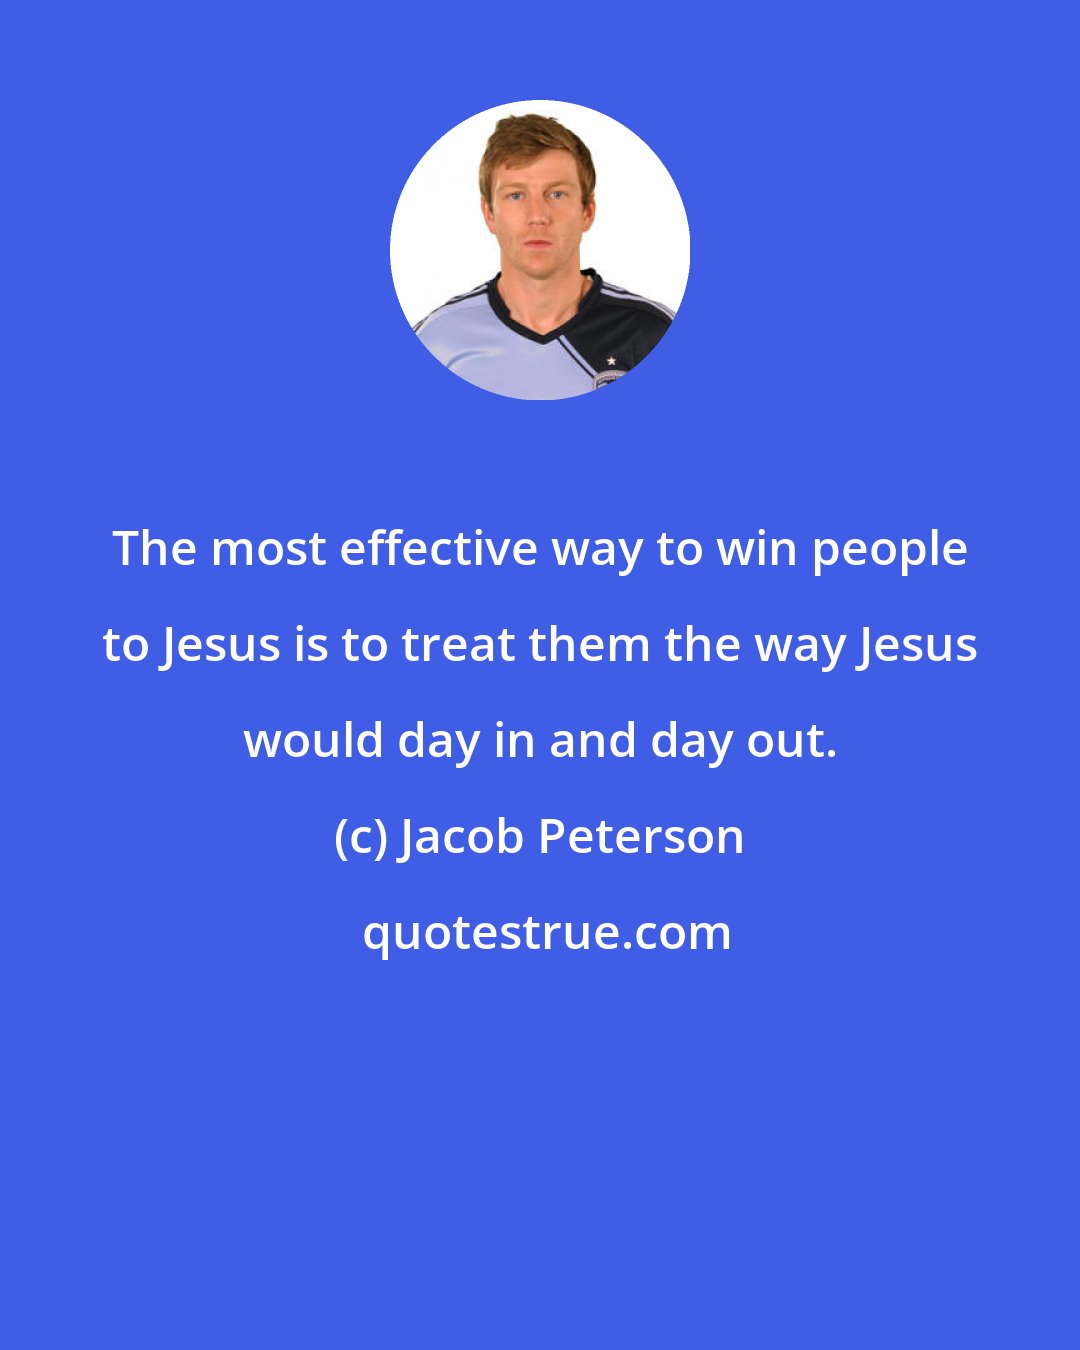 Jacob Peterson: The most effective way to win people to Jesus is to treat them the way Jesus would day in and day out.